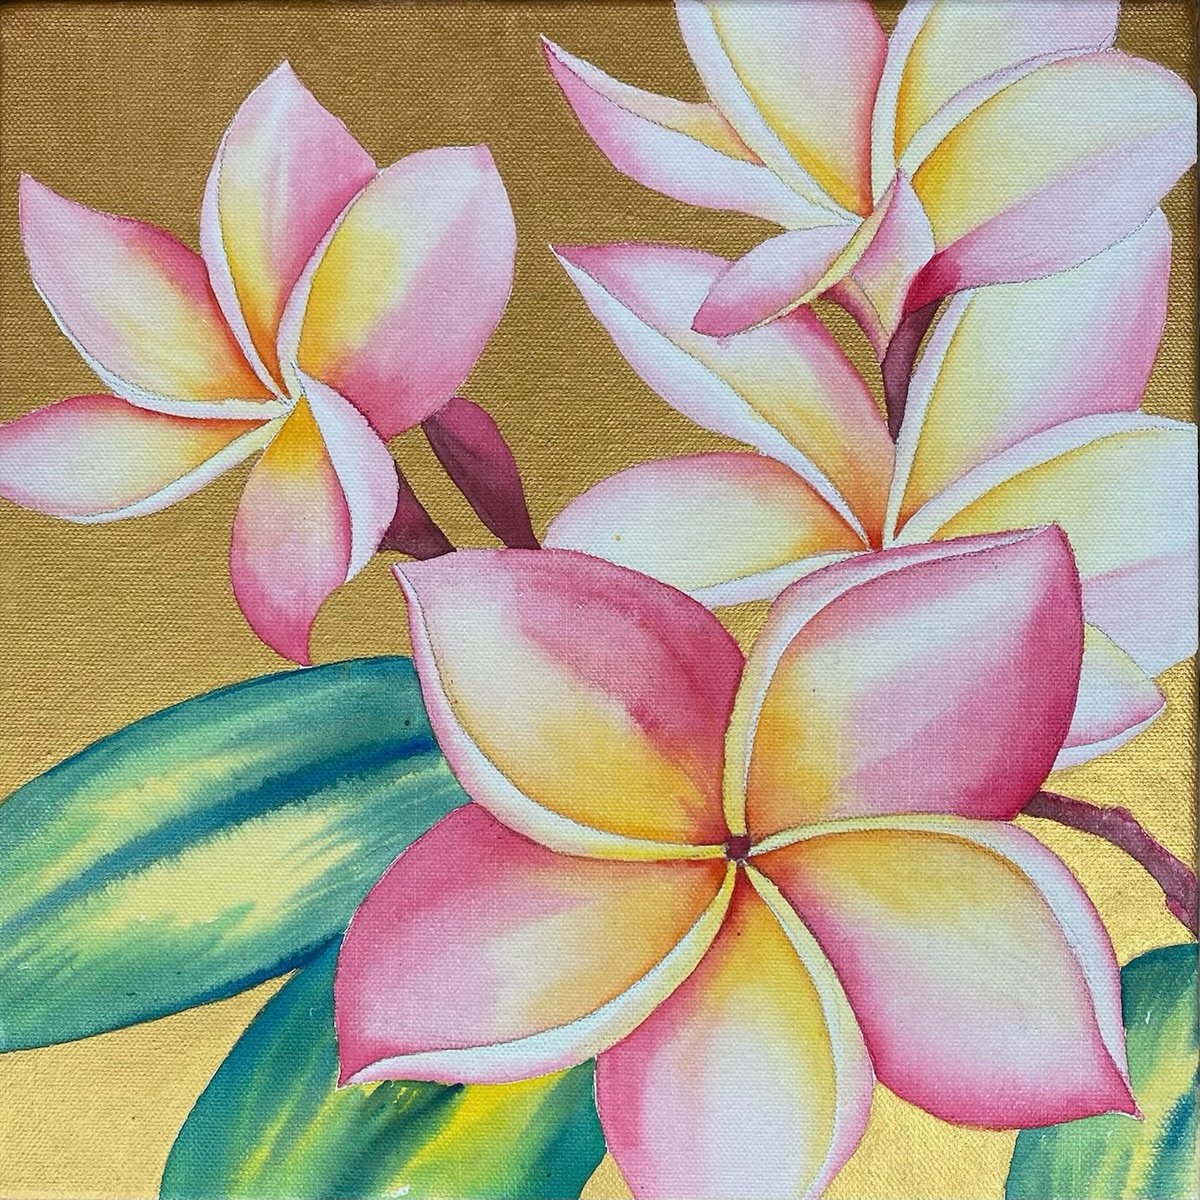 Into Paradise VII- Frangipani fever by Jill Griffin